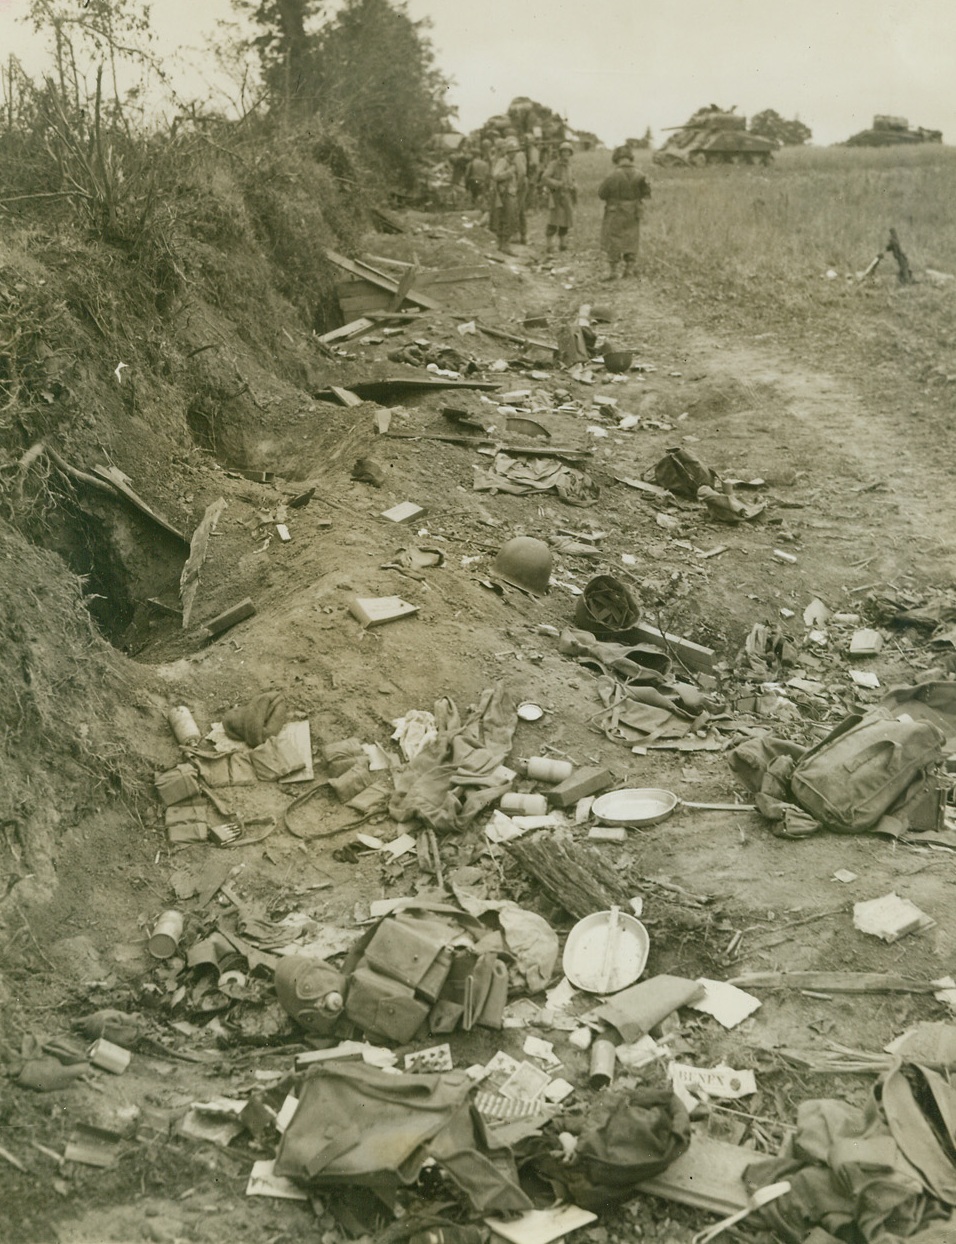 “High Water Mark” of Battle, 7/25/1944. St. Lo, France – Abandoned foxholes and hurriedly discarded effects mark a line behind this hedgerow where American troops rested before plunging on into the battle for St. Lo. Helmets, playing cards, mess kits, and hundreds of other belongings litter this field. In the background, tanks and men are gathered in the field. Passed by censors. Credit: ACME Photo by Bert Brandt for War Picture Pool;